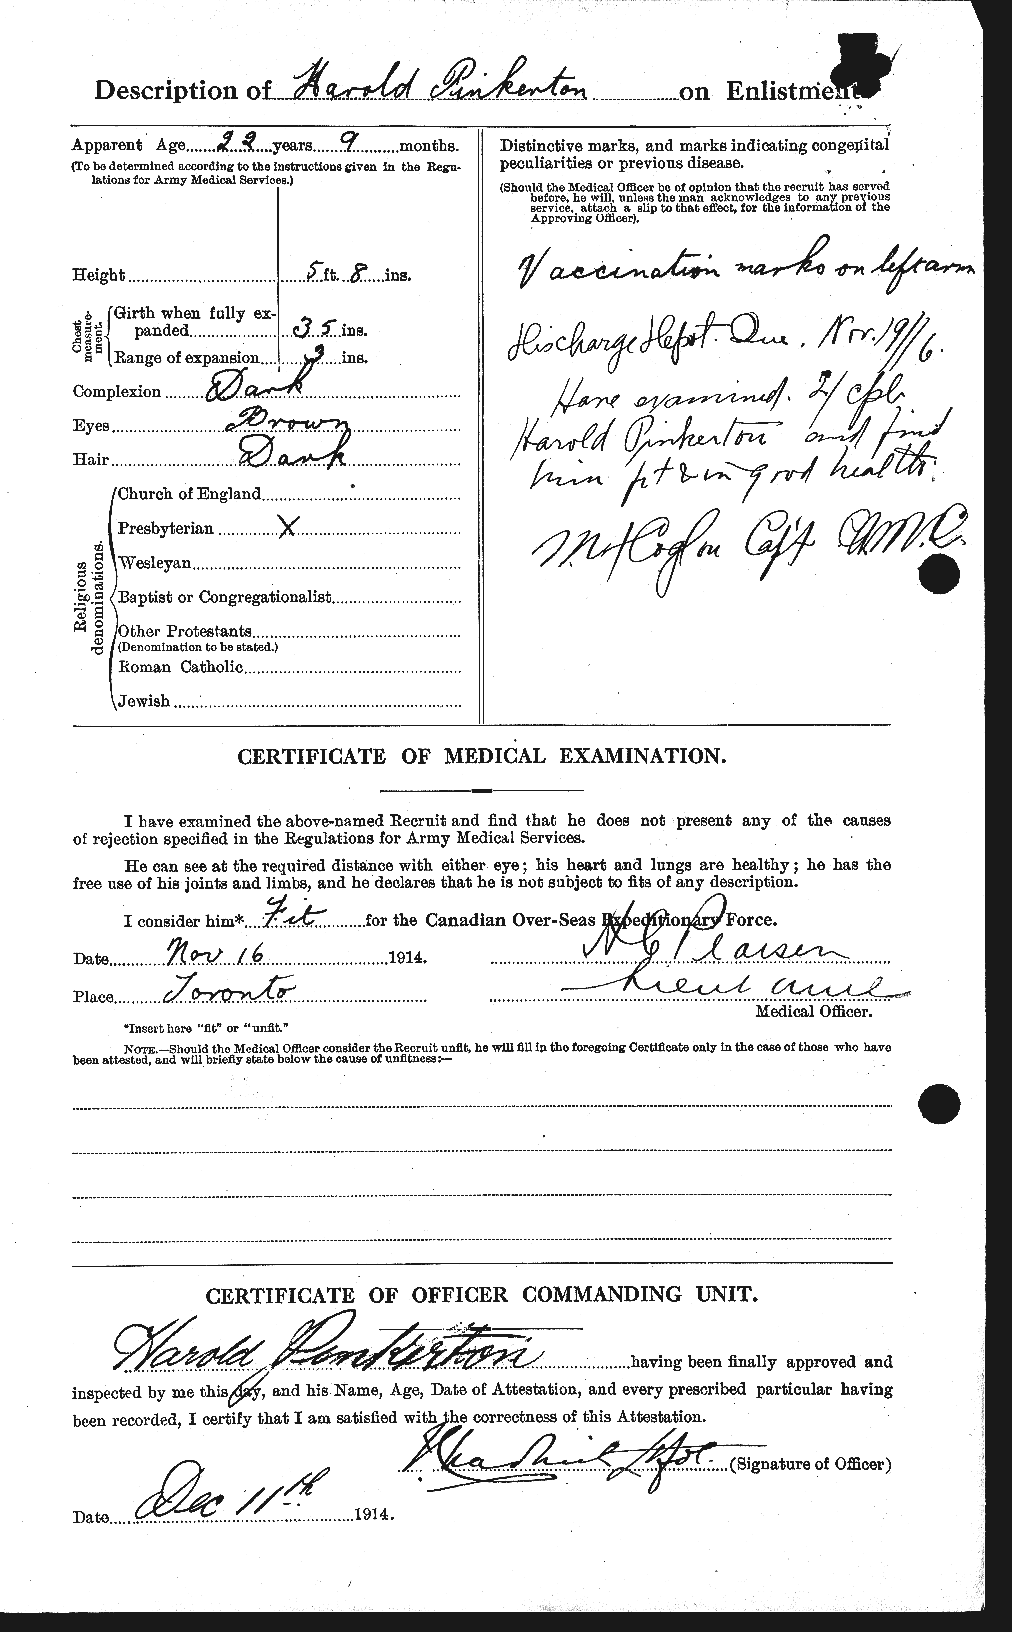 Personnel Records of the First World War - CEF 582638b